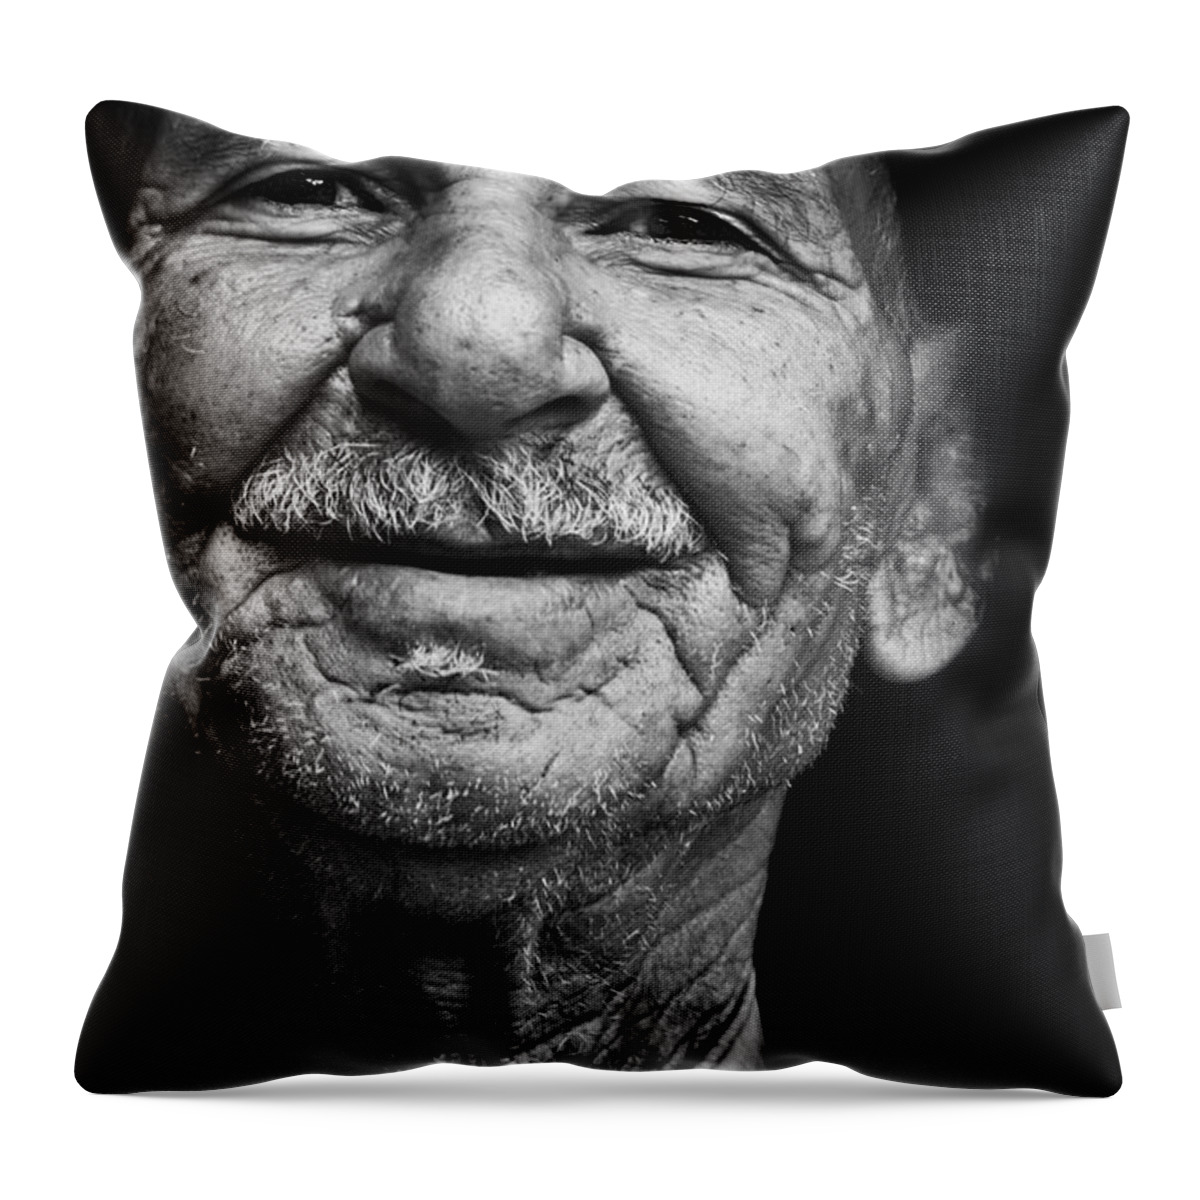 Marrakesh Throw Pillow featuring the photograph Waterseller by Marion Galt